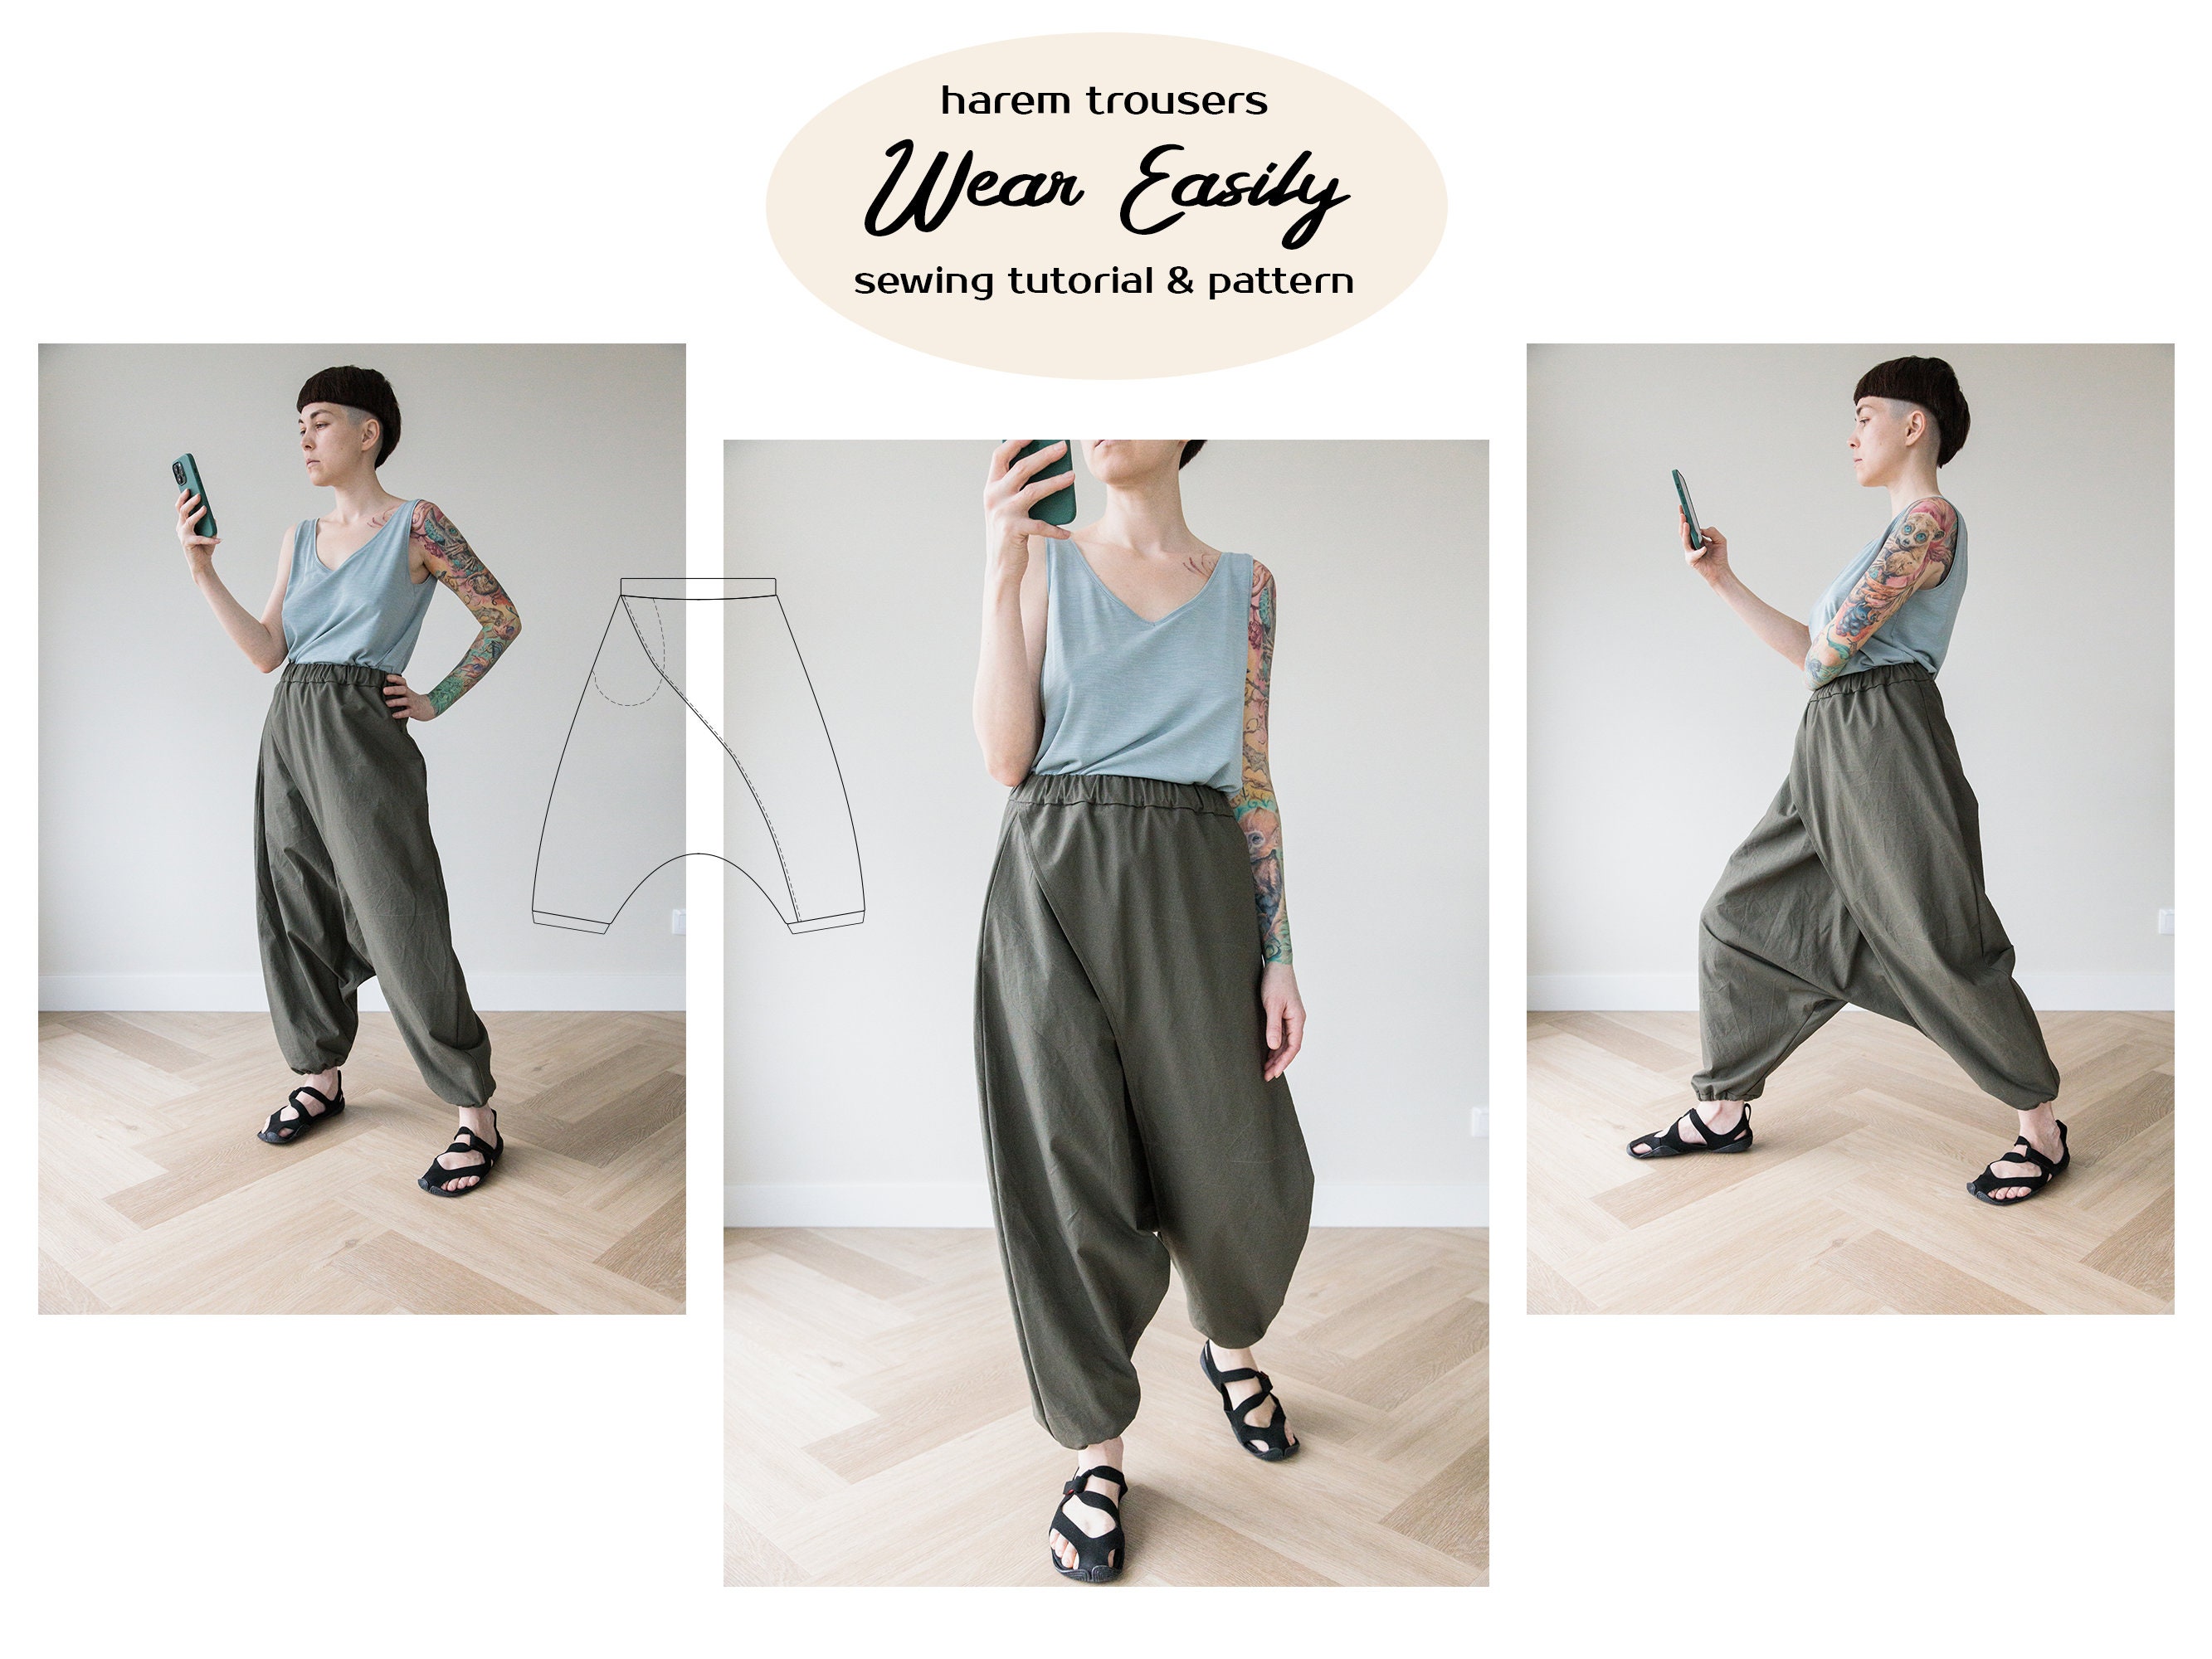 nsendm Female Pants Adult Loose Fitting Pants for Women Dressy